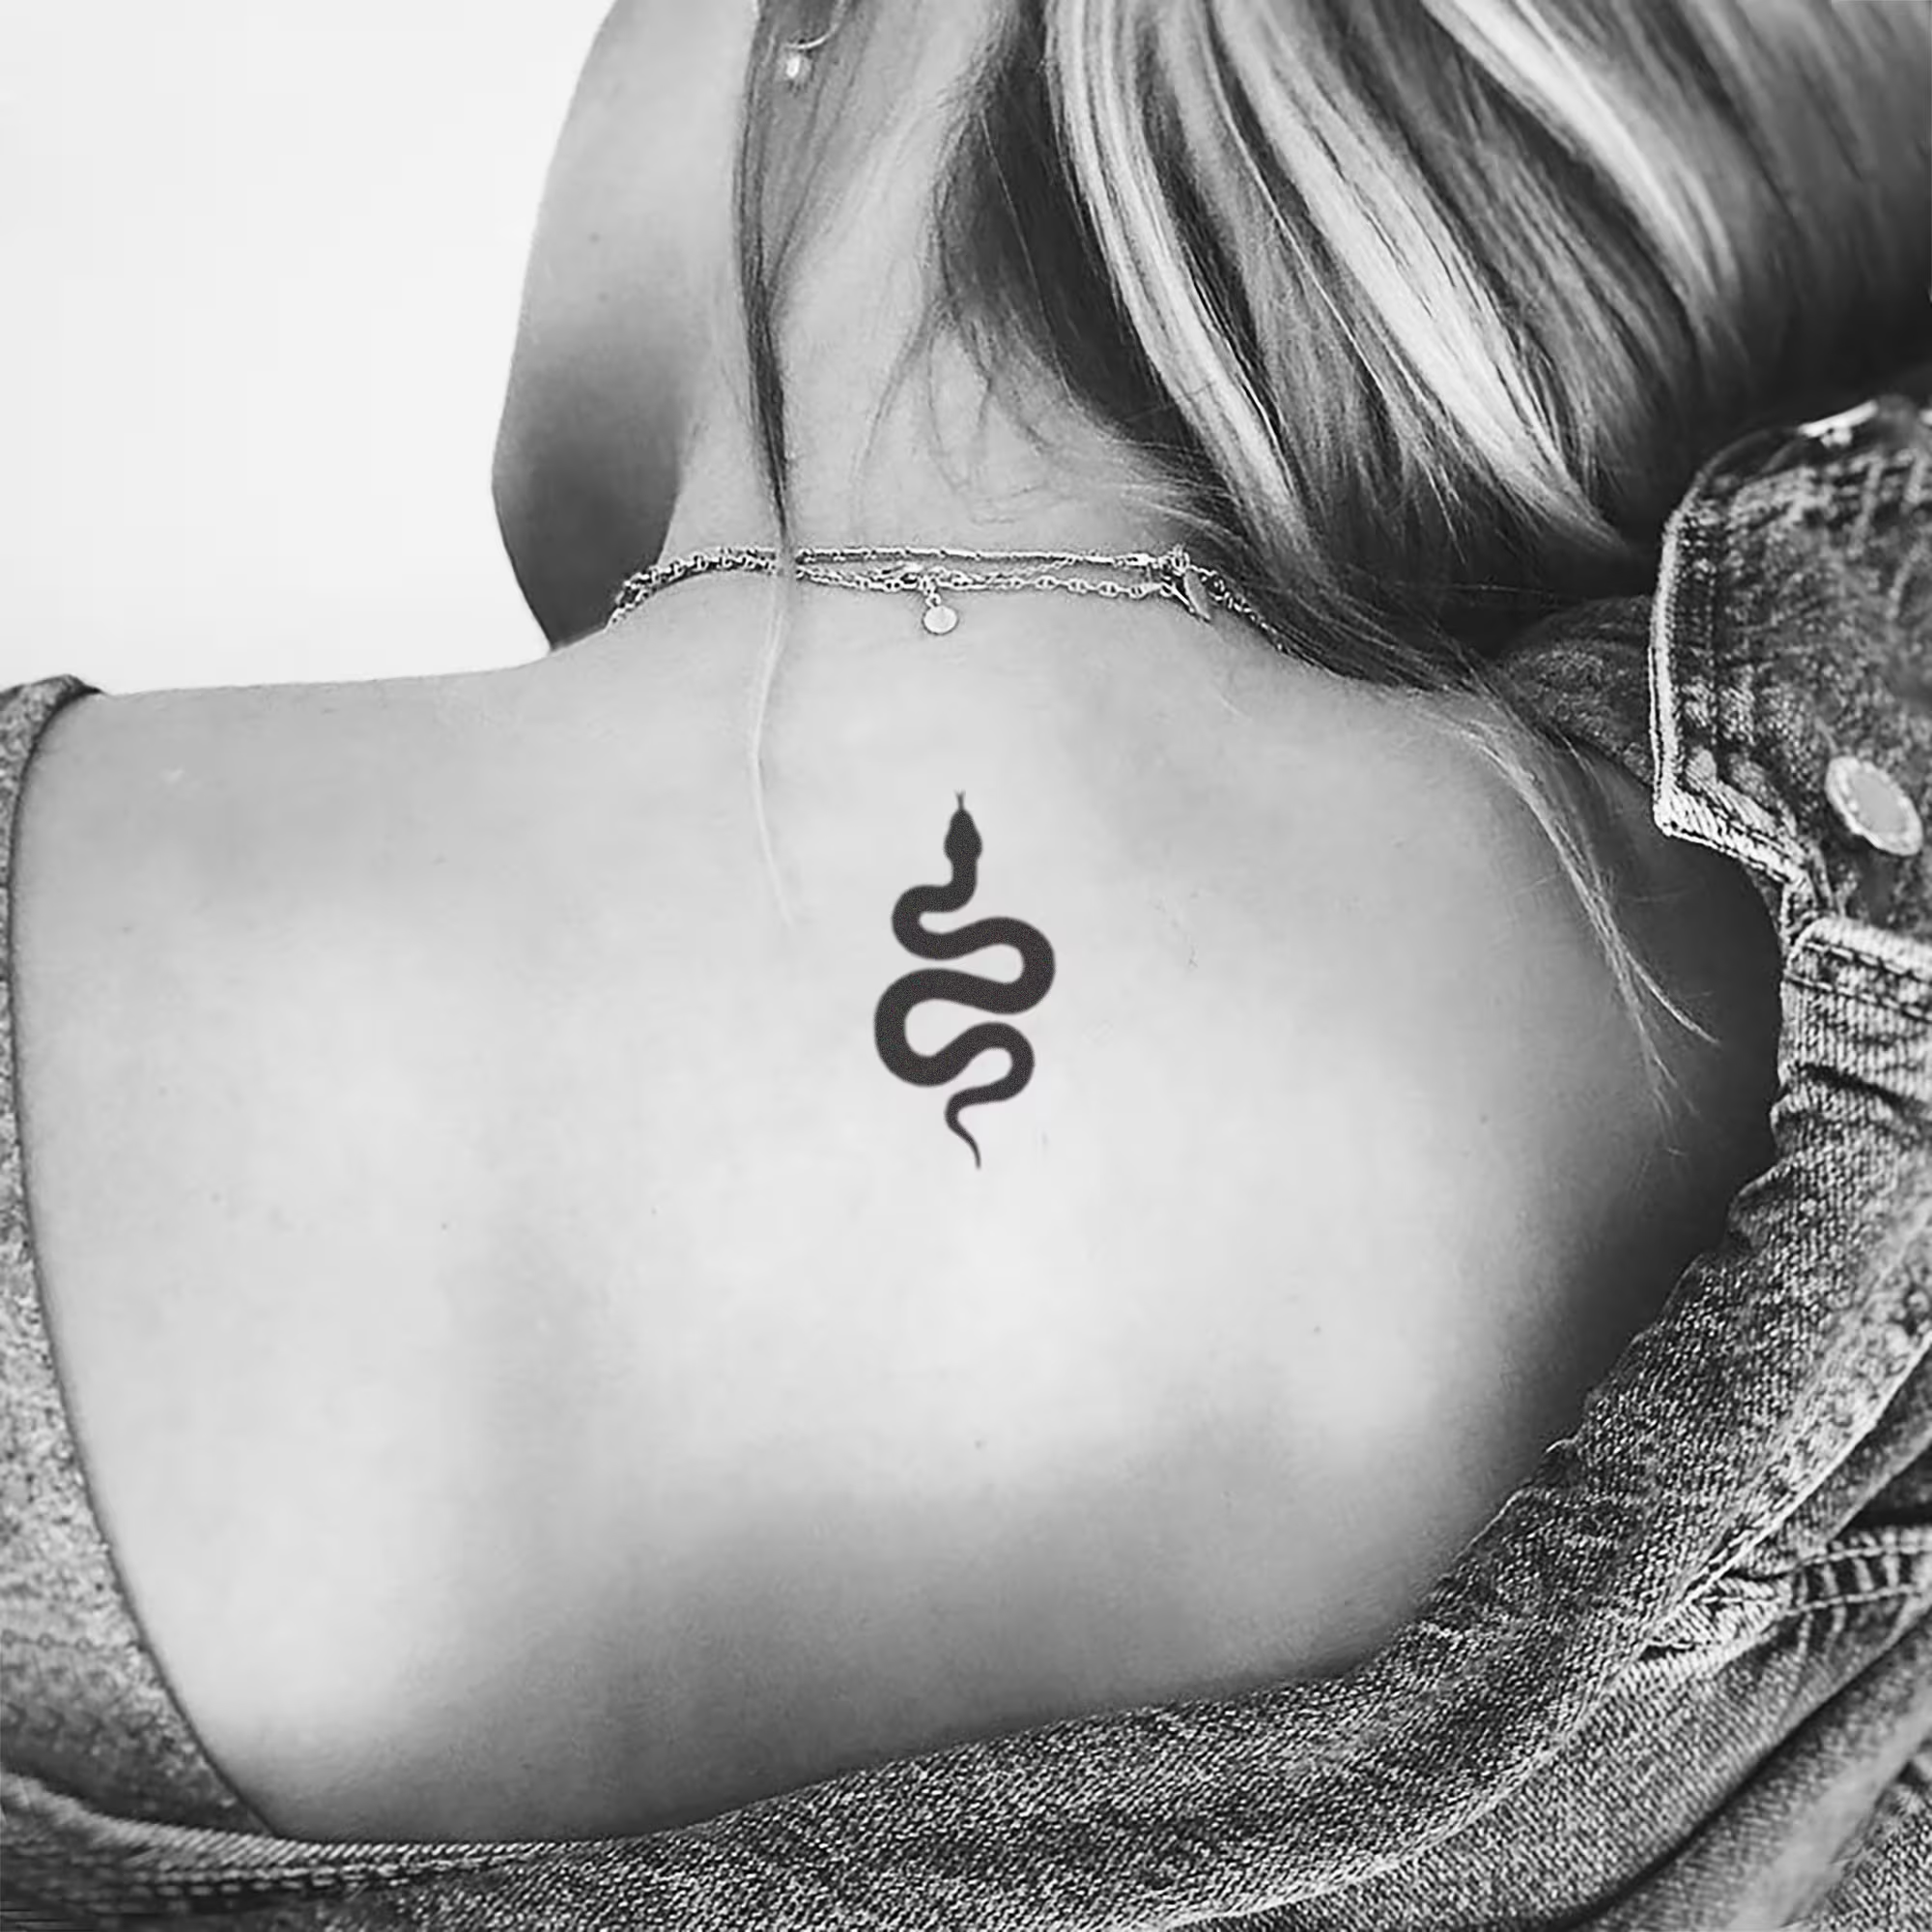 75 Unique Small Tattoo Designs & Ideas : Small Meaningful Tattoo on Arm I  Take You | Wedding Readings | Wedding Ideas | Wedding Dresses | Wedding  Theme